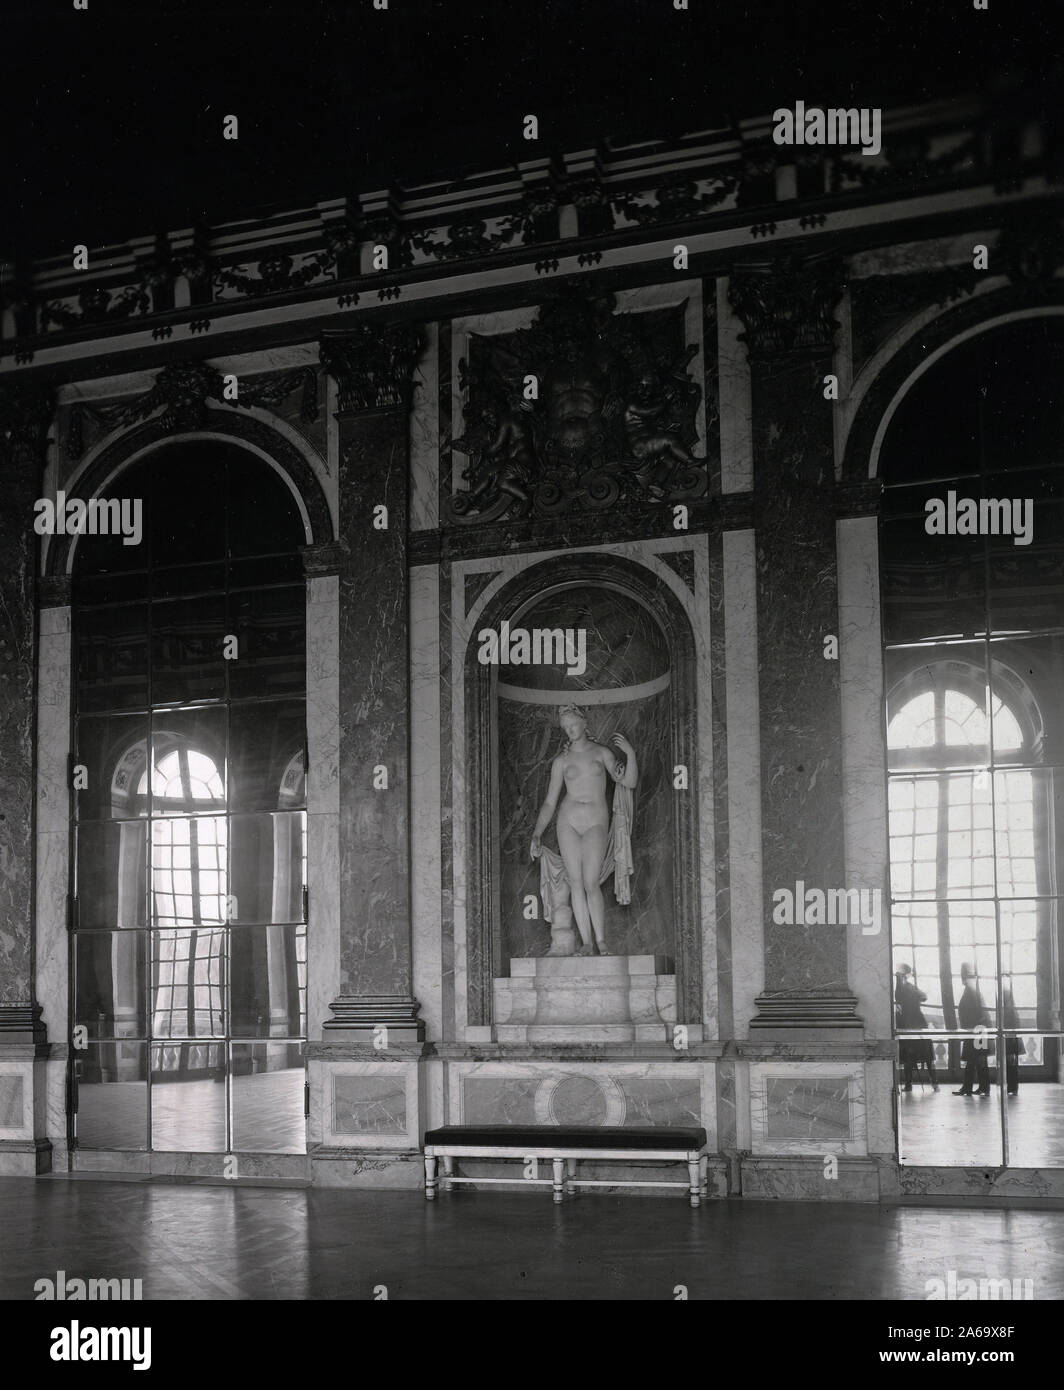 Scene in Palace of Versailles shows a statue of Venus that stands in center of Glass Gallery where the signing of the peace treaty will be done. Paris, France ca. 3/1919 Stock Photo